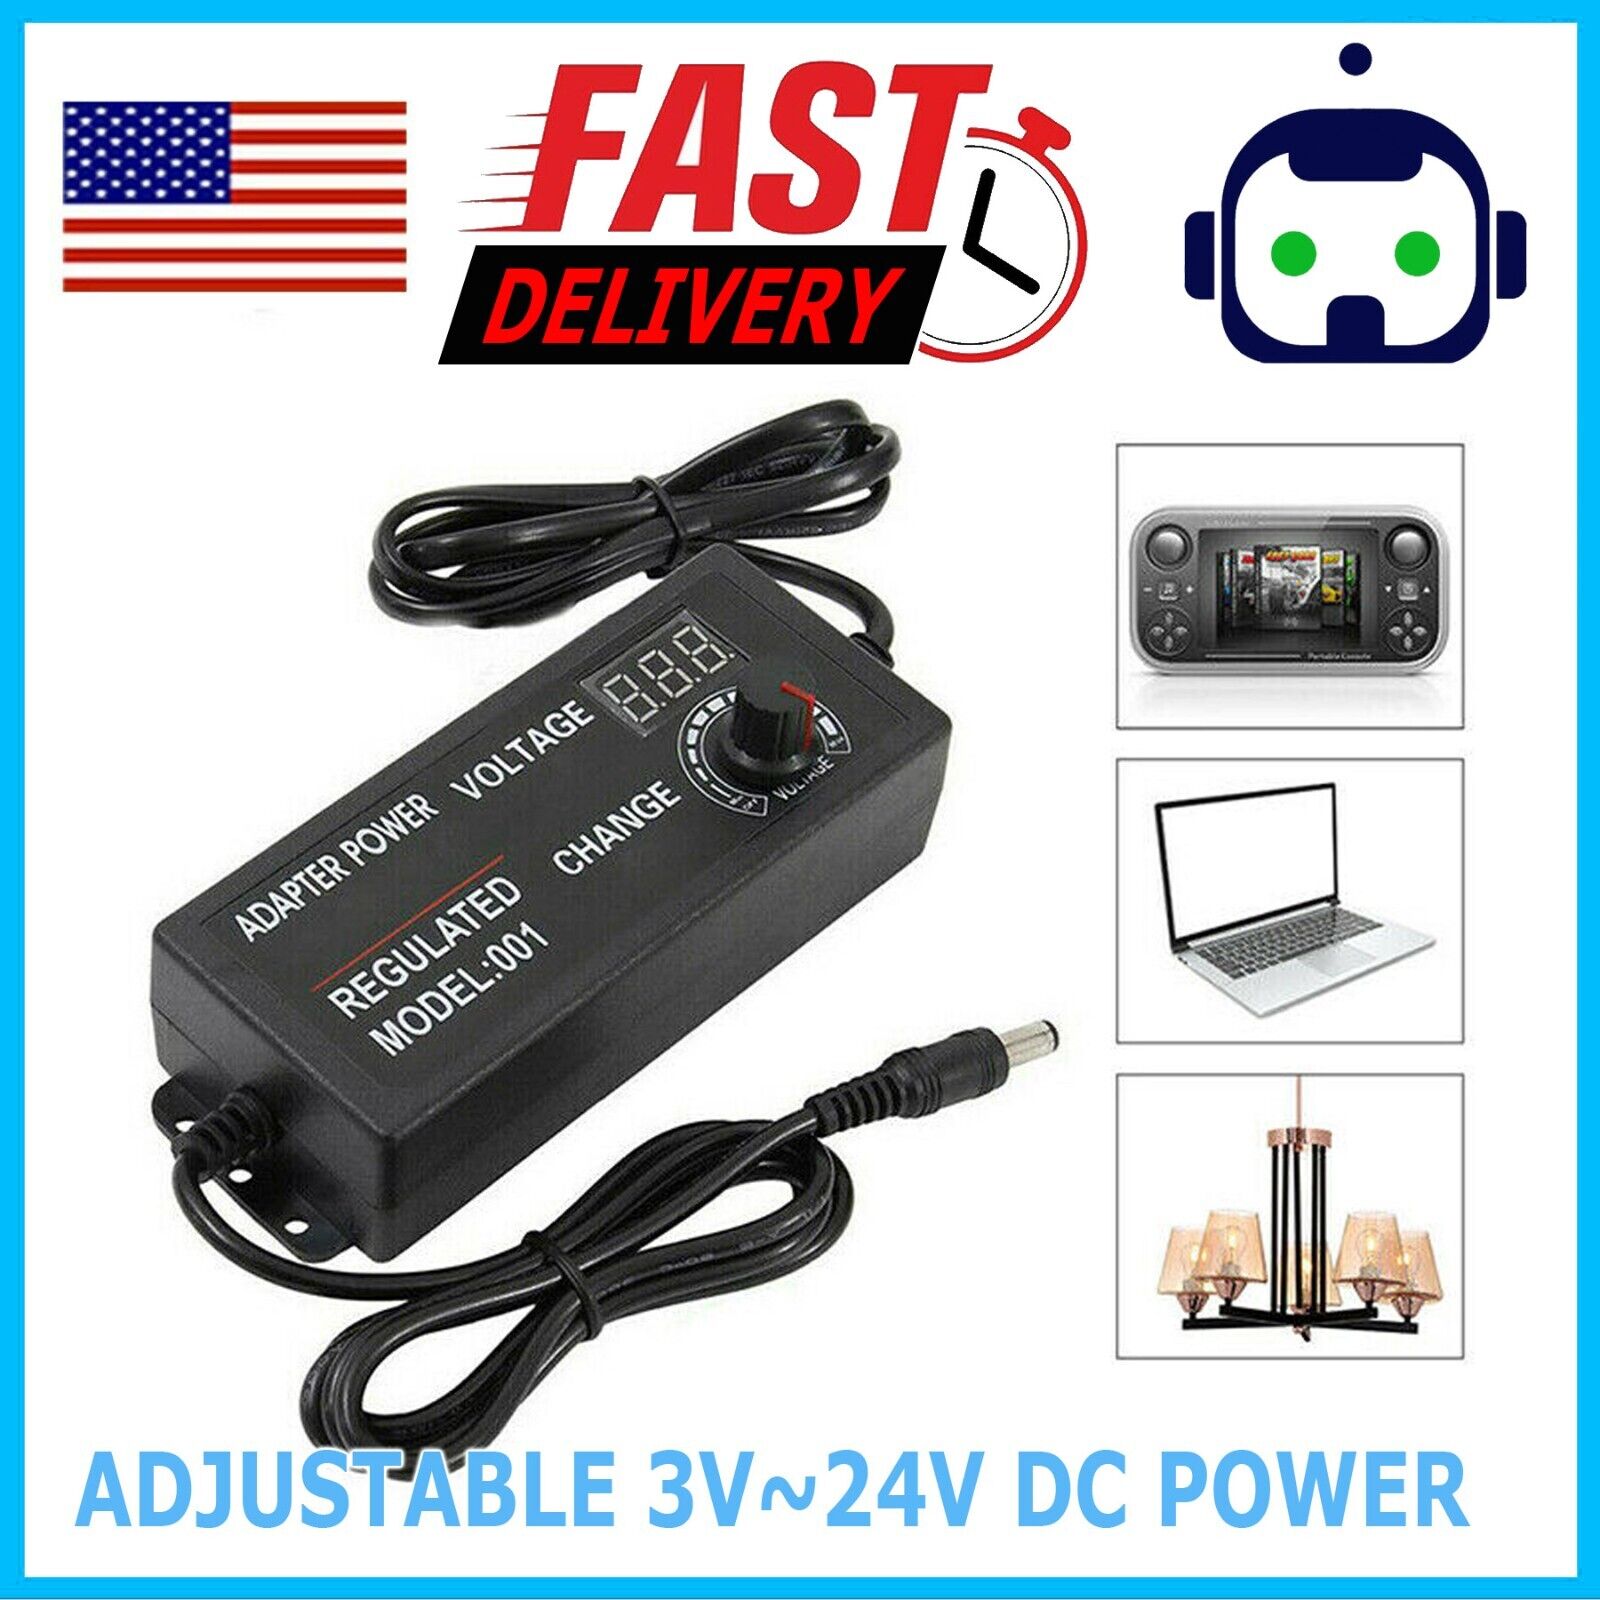 Adjustable AC/DC Power Supply Adapter Charger Variable Voltage 3V-24V Universal